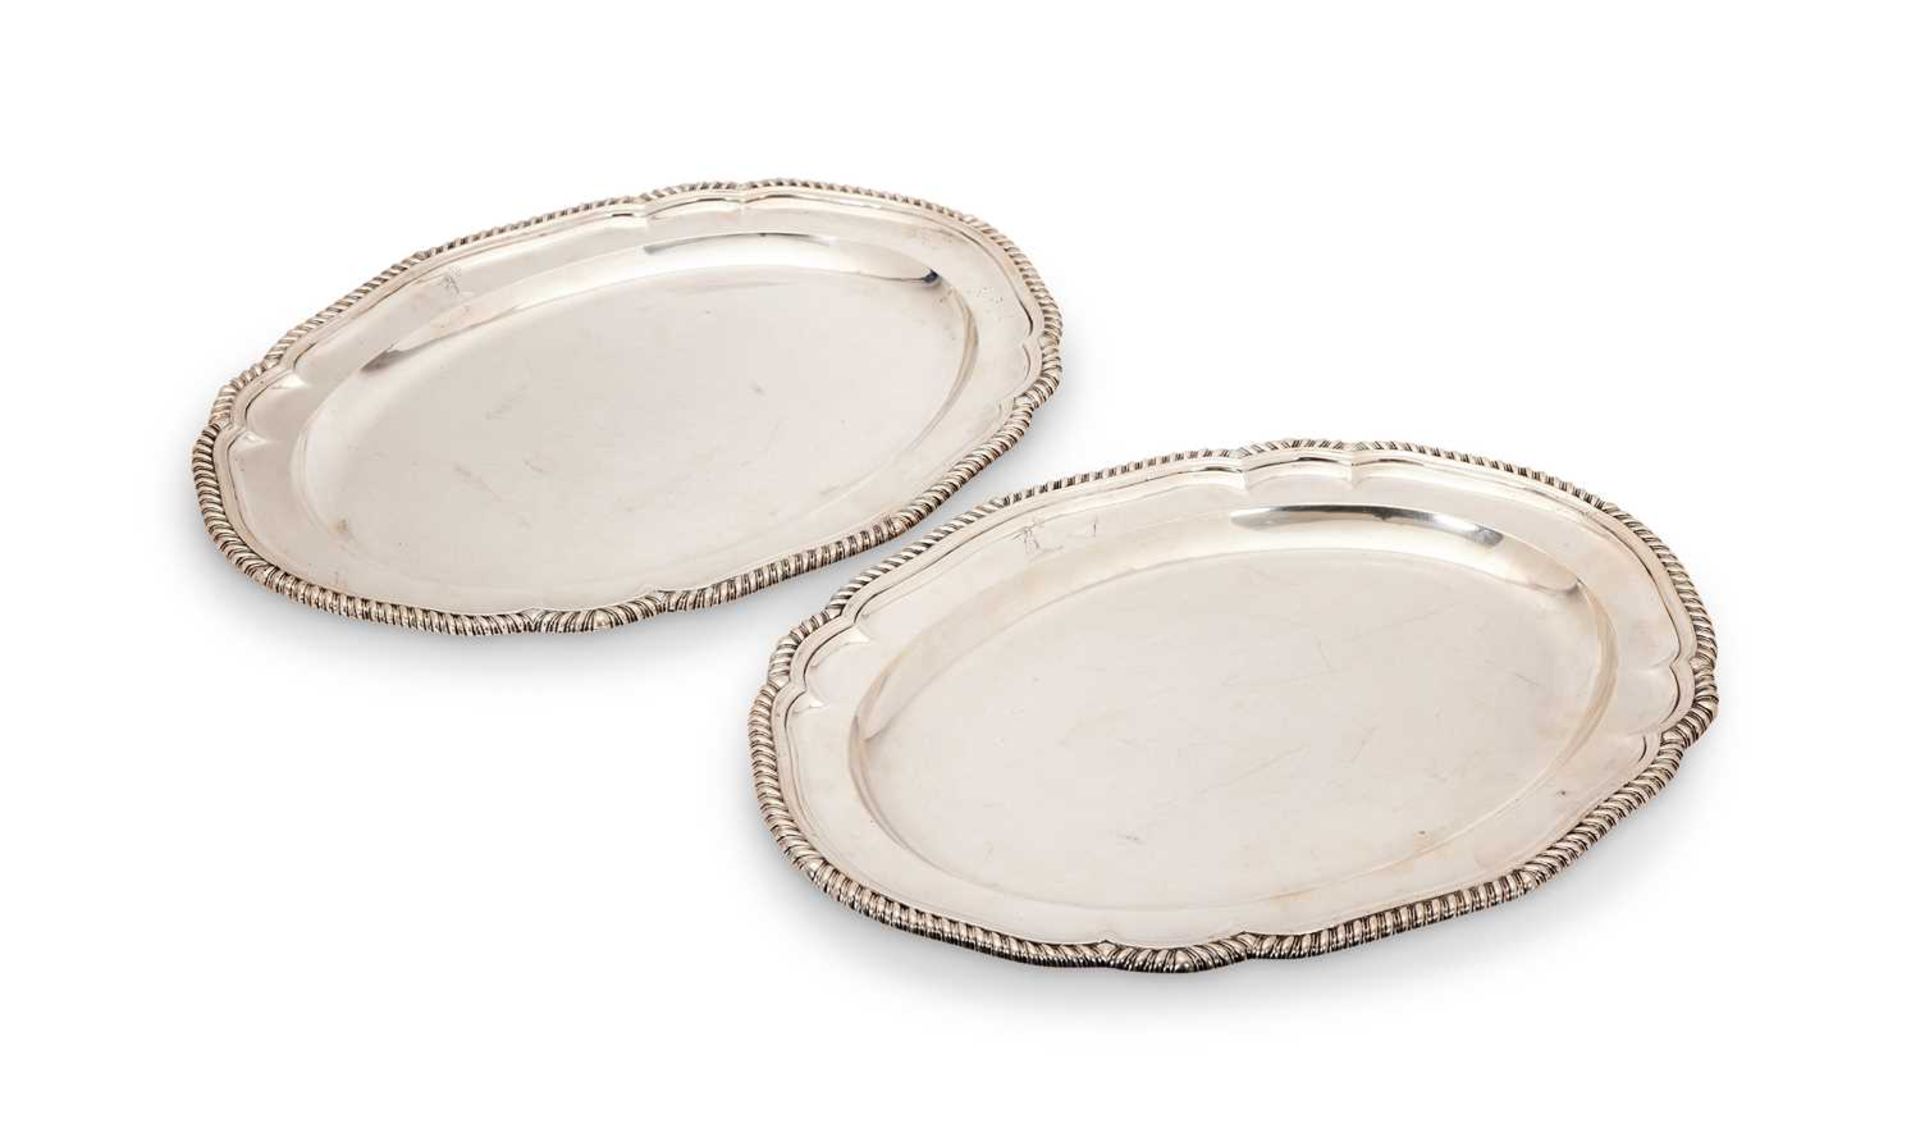 PAUL STORR: A PAIR OF GEORGE III STERLING SILVER MEAT DISHES, LONDON, 1803